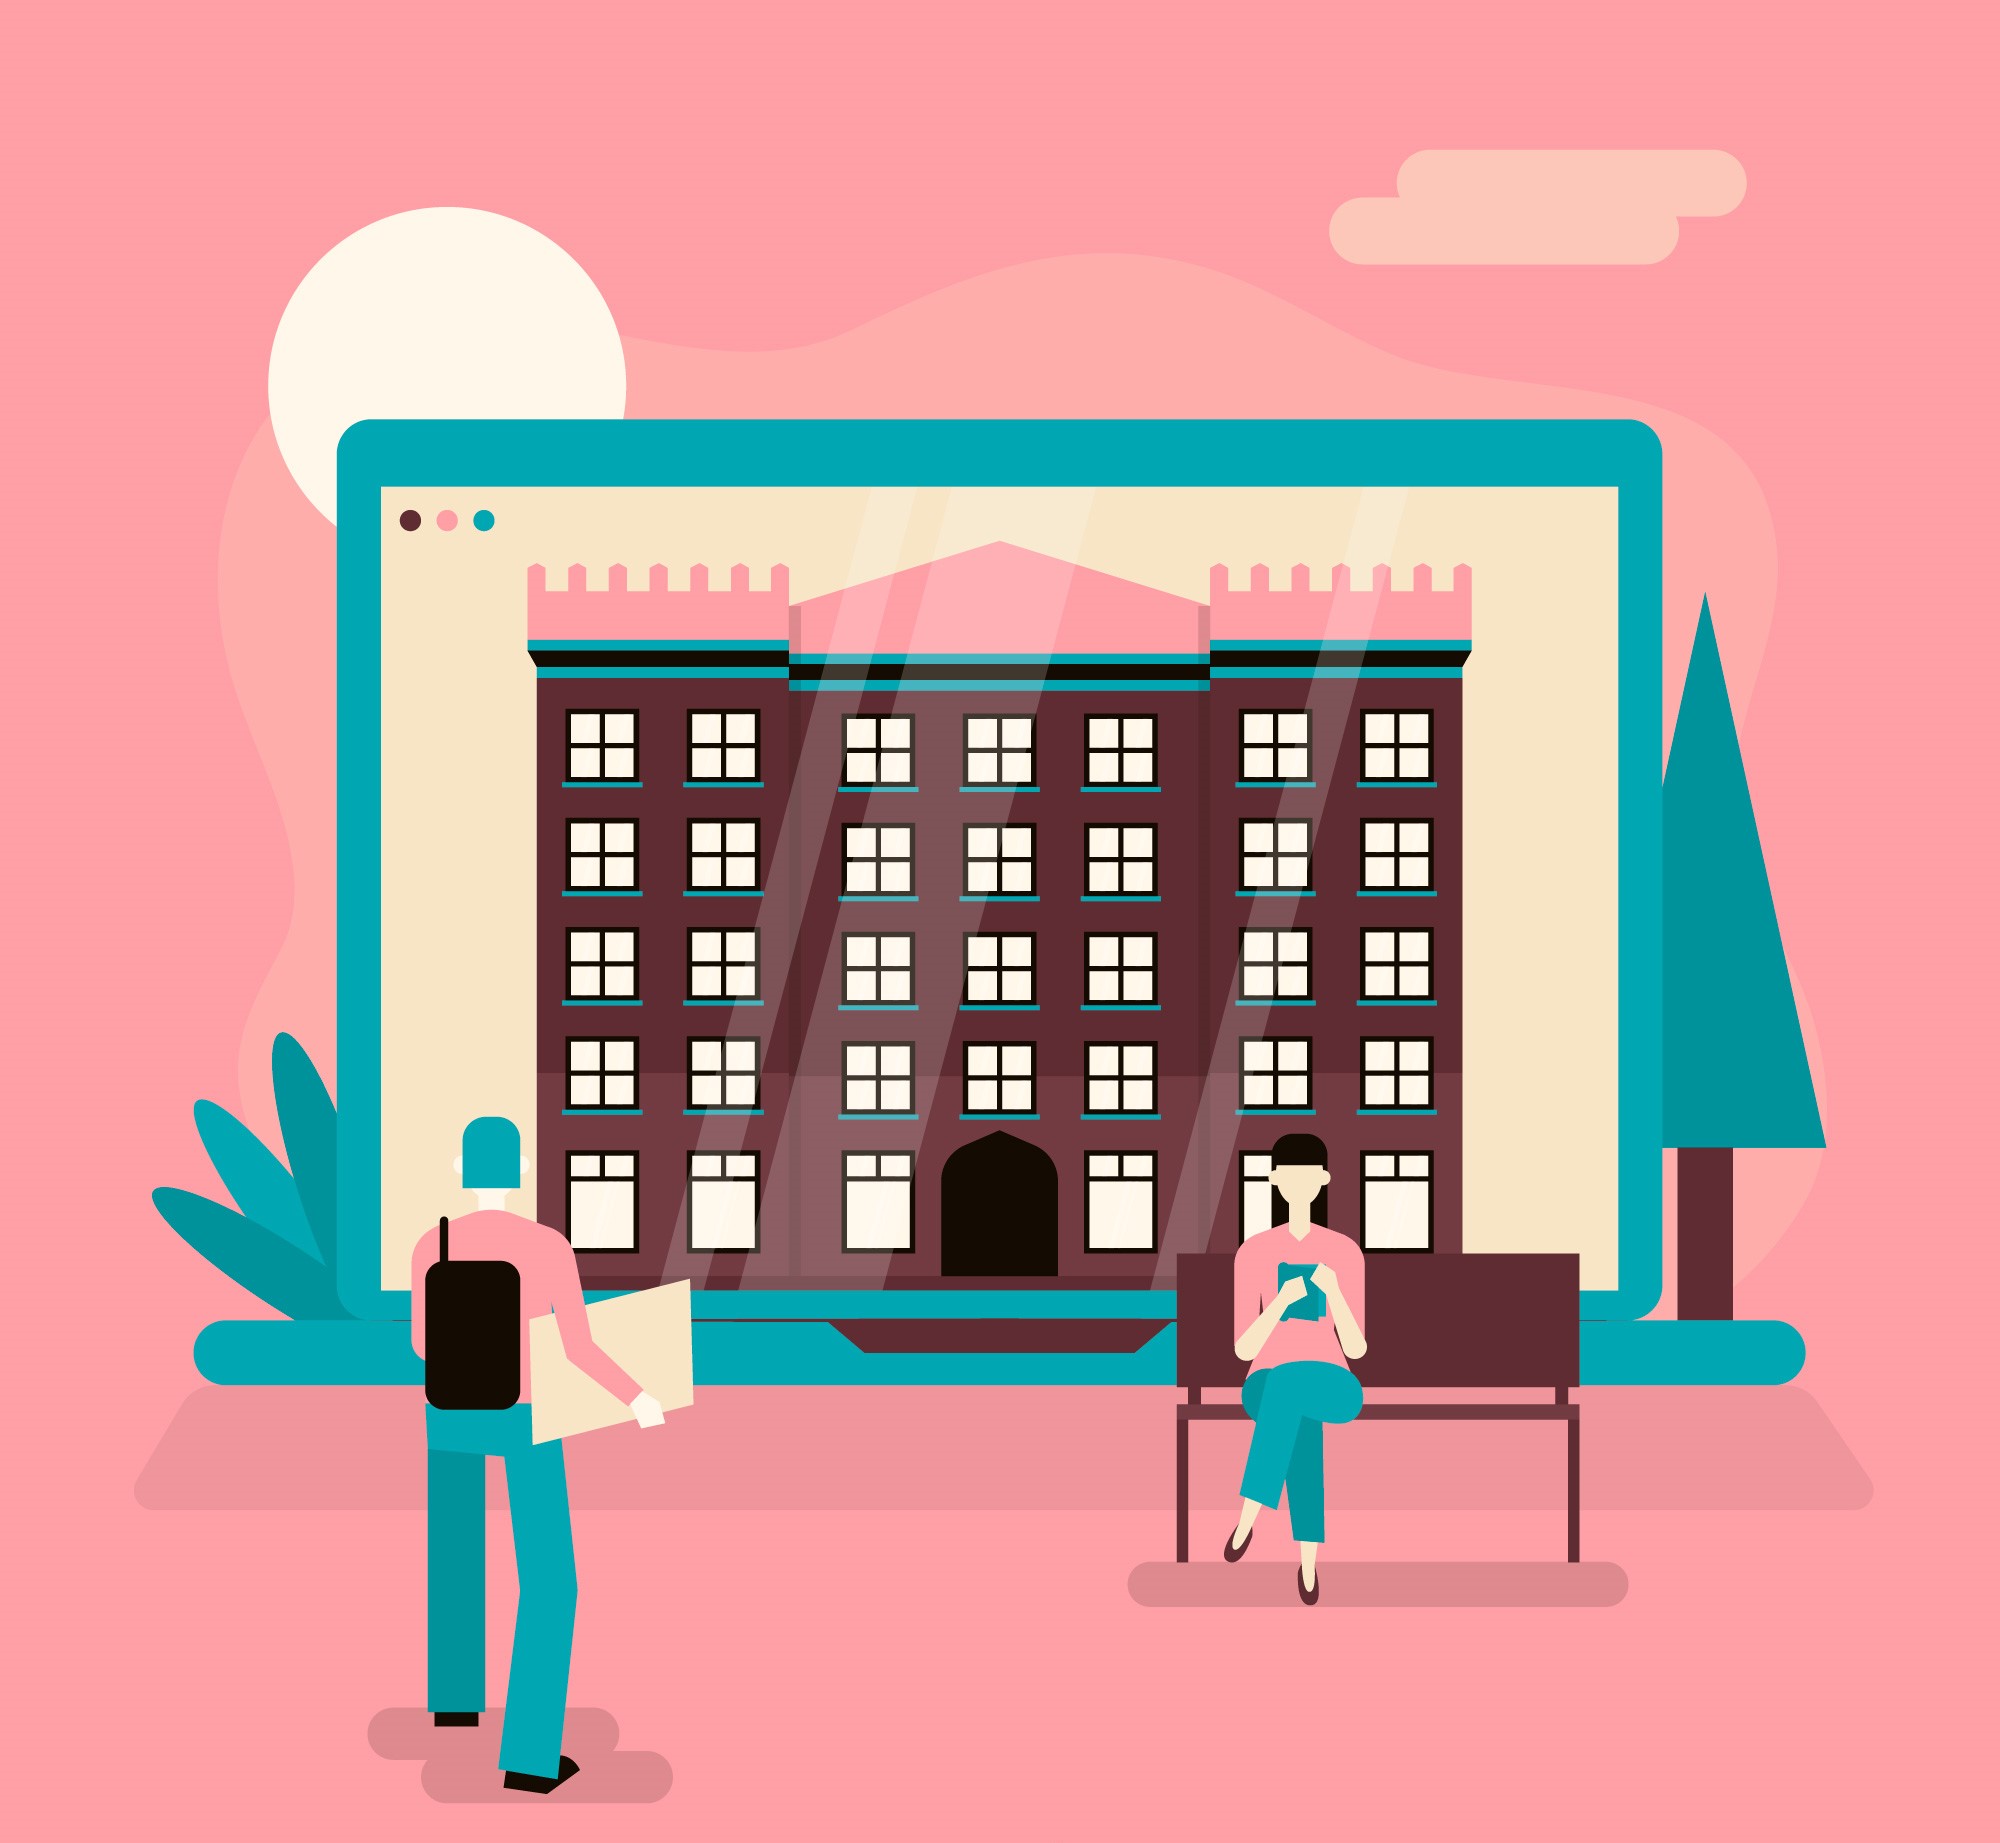 Discover the perfect student housing options with our comprehensive overview. From dormitories to off-campus living, find the ideal <a href=https://msmunifystudyabroadcounsultant.medium.com/types-of-student-accommodation-a-comprehensive-overview-cb06dc3eebdb">student accommodation </a> for your academic journey. Explore the types of student housing to make an informed choice today.
